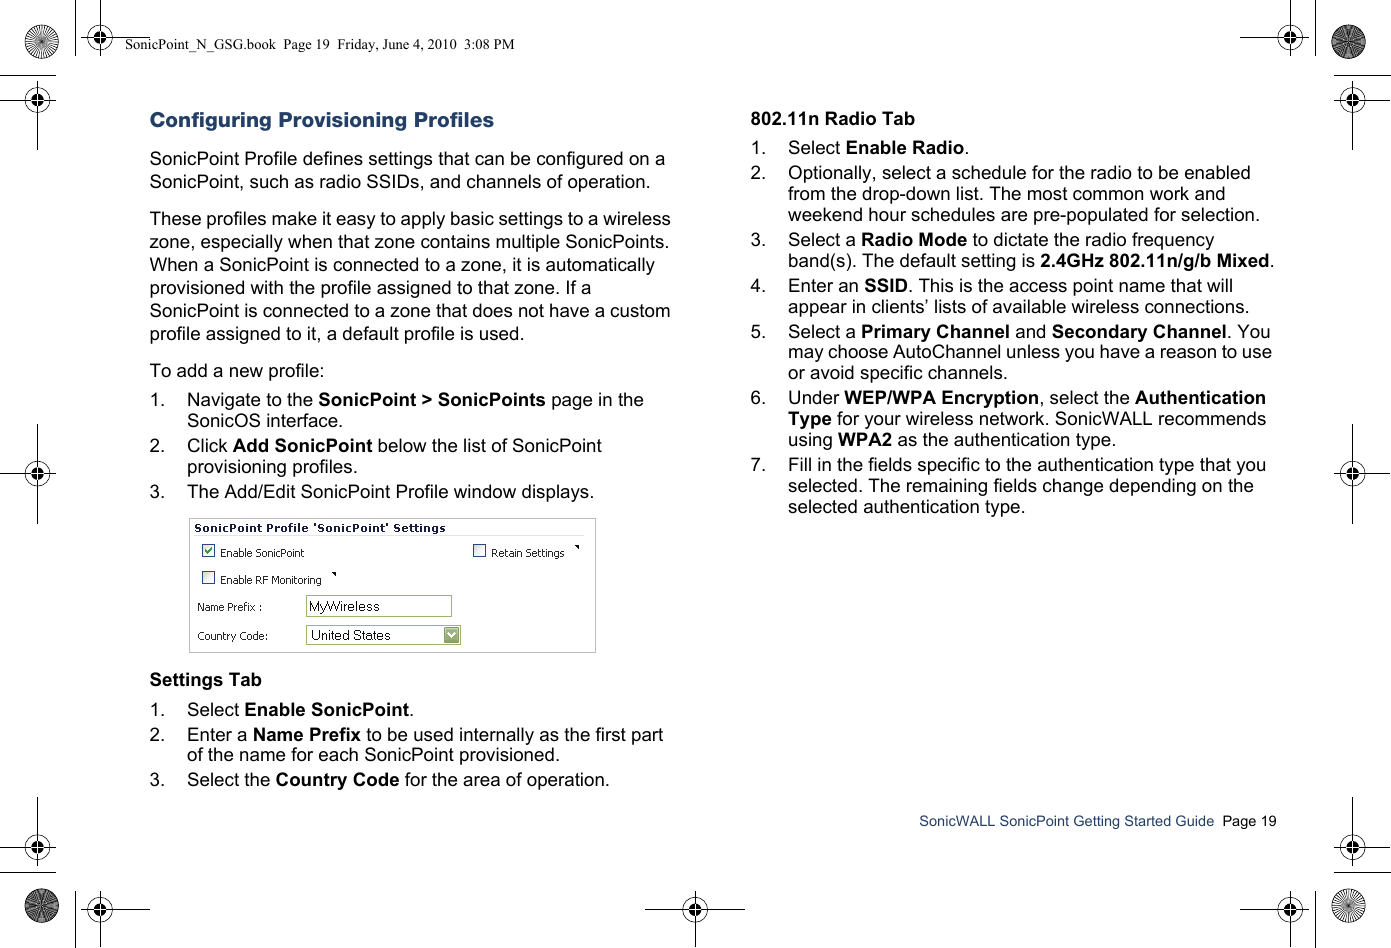 SonicWALL SonicPoint Getting Started Guide  Page 19Configuring Provisioning ProfilesSonicPoint Profile defines settings that can be configured on a SonicPoint, such as radio SSIDs, and channels of operation. These profiles make it easy to apply basic settings to a wireless zone, especially when that zone contains multiple SonicPoints. When a SonicPoint is connected to a zone, it is automatically provisioned with the profile assigned to that zone. If a SonicPoint is connected to a zone that does not have a custom profile assigned to it, a default profile is used.To add a new profile:1. Navigate to the SonicPoint &gt; SonicPoints page in the SonicOS interface.2. Click Add SonicPoint below the list of SonicPoint provisioning profiles. 3. The Add/Edit SonicPoint Profile window displays.Settings Tab1. Select Enable SonicPoint.2. Enter a Name Prefix to be used internally as the first part of the name for each SonicPoint provisioned.3. Select the Country Code for the area of operation.802.11n Radio Tab1. Select Enable Radio. 2. Optionally, select a schedule for the radio to be enabled from the drop-down list. The most common work and weekend hour schedules are pre-populated for selection.3. Select a Radio Mode to dictate the radio frequency band(s). The default setting is 2.4GHz 802.11n/g/b Mixed.4. Enter an SSID. This is the access point name that will appear in clients’ lists of available wireless connections.5. Select a Primary Channel and Secondary Channel. You may choose AutoChannel unless you have a reason to use or avoid specific channels.6. Under WEP/WPA Encryption, select the Authentication Type for your wireless network. SonicWALL recommends using WPA2 as the authentication type.7. Fill in the fields specific to the authentication type that you selected. The remaining fields change depending on the selected authentication type. SonicPoint_N_GSG.book  Page 19  Friday, June 4, 2010  3:08 PM